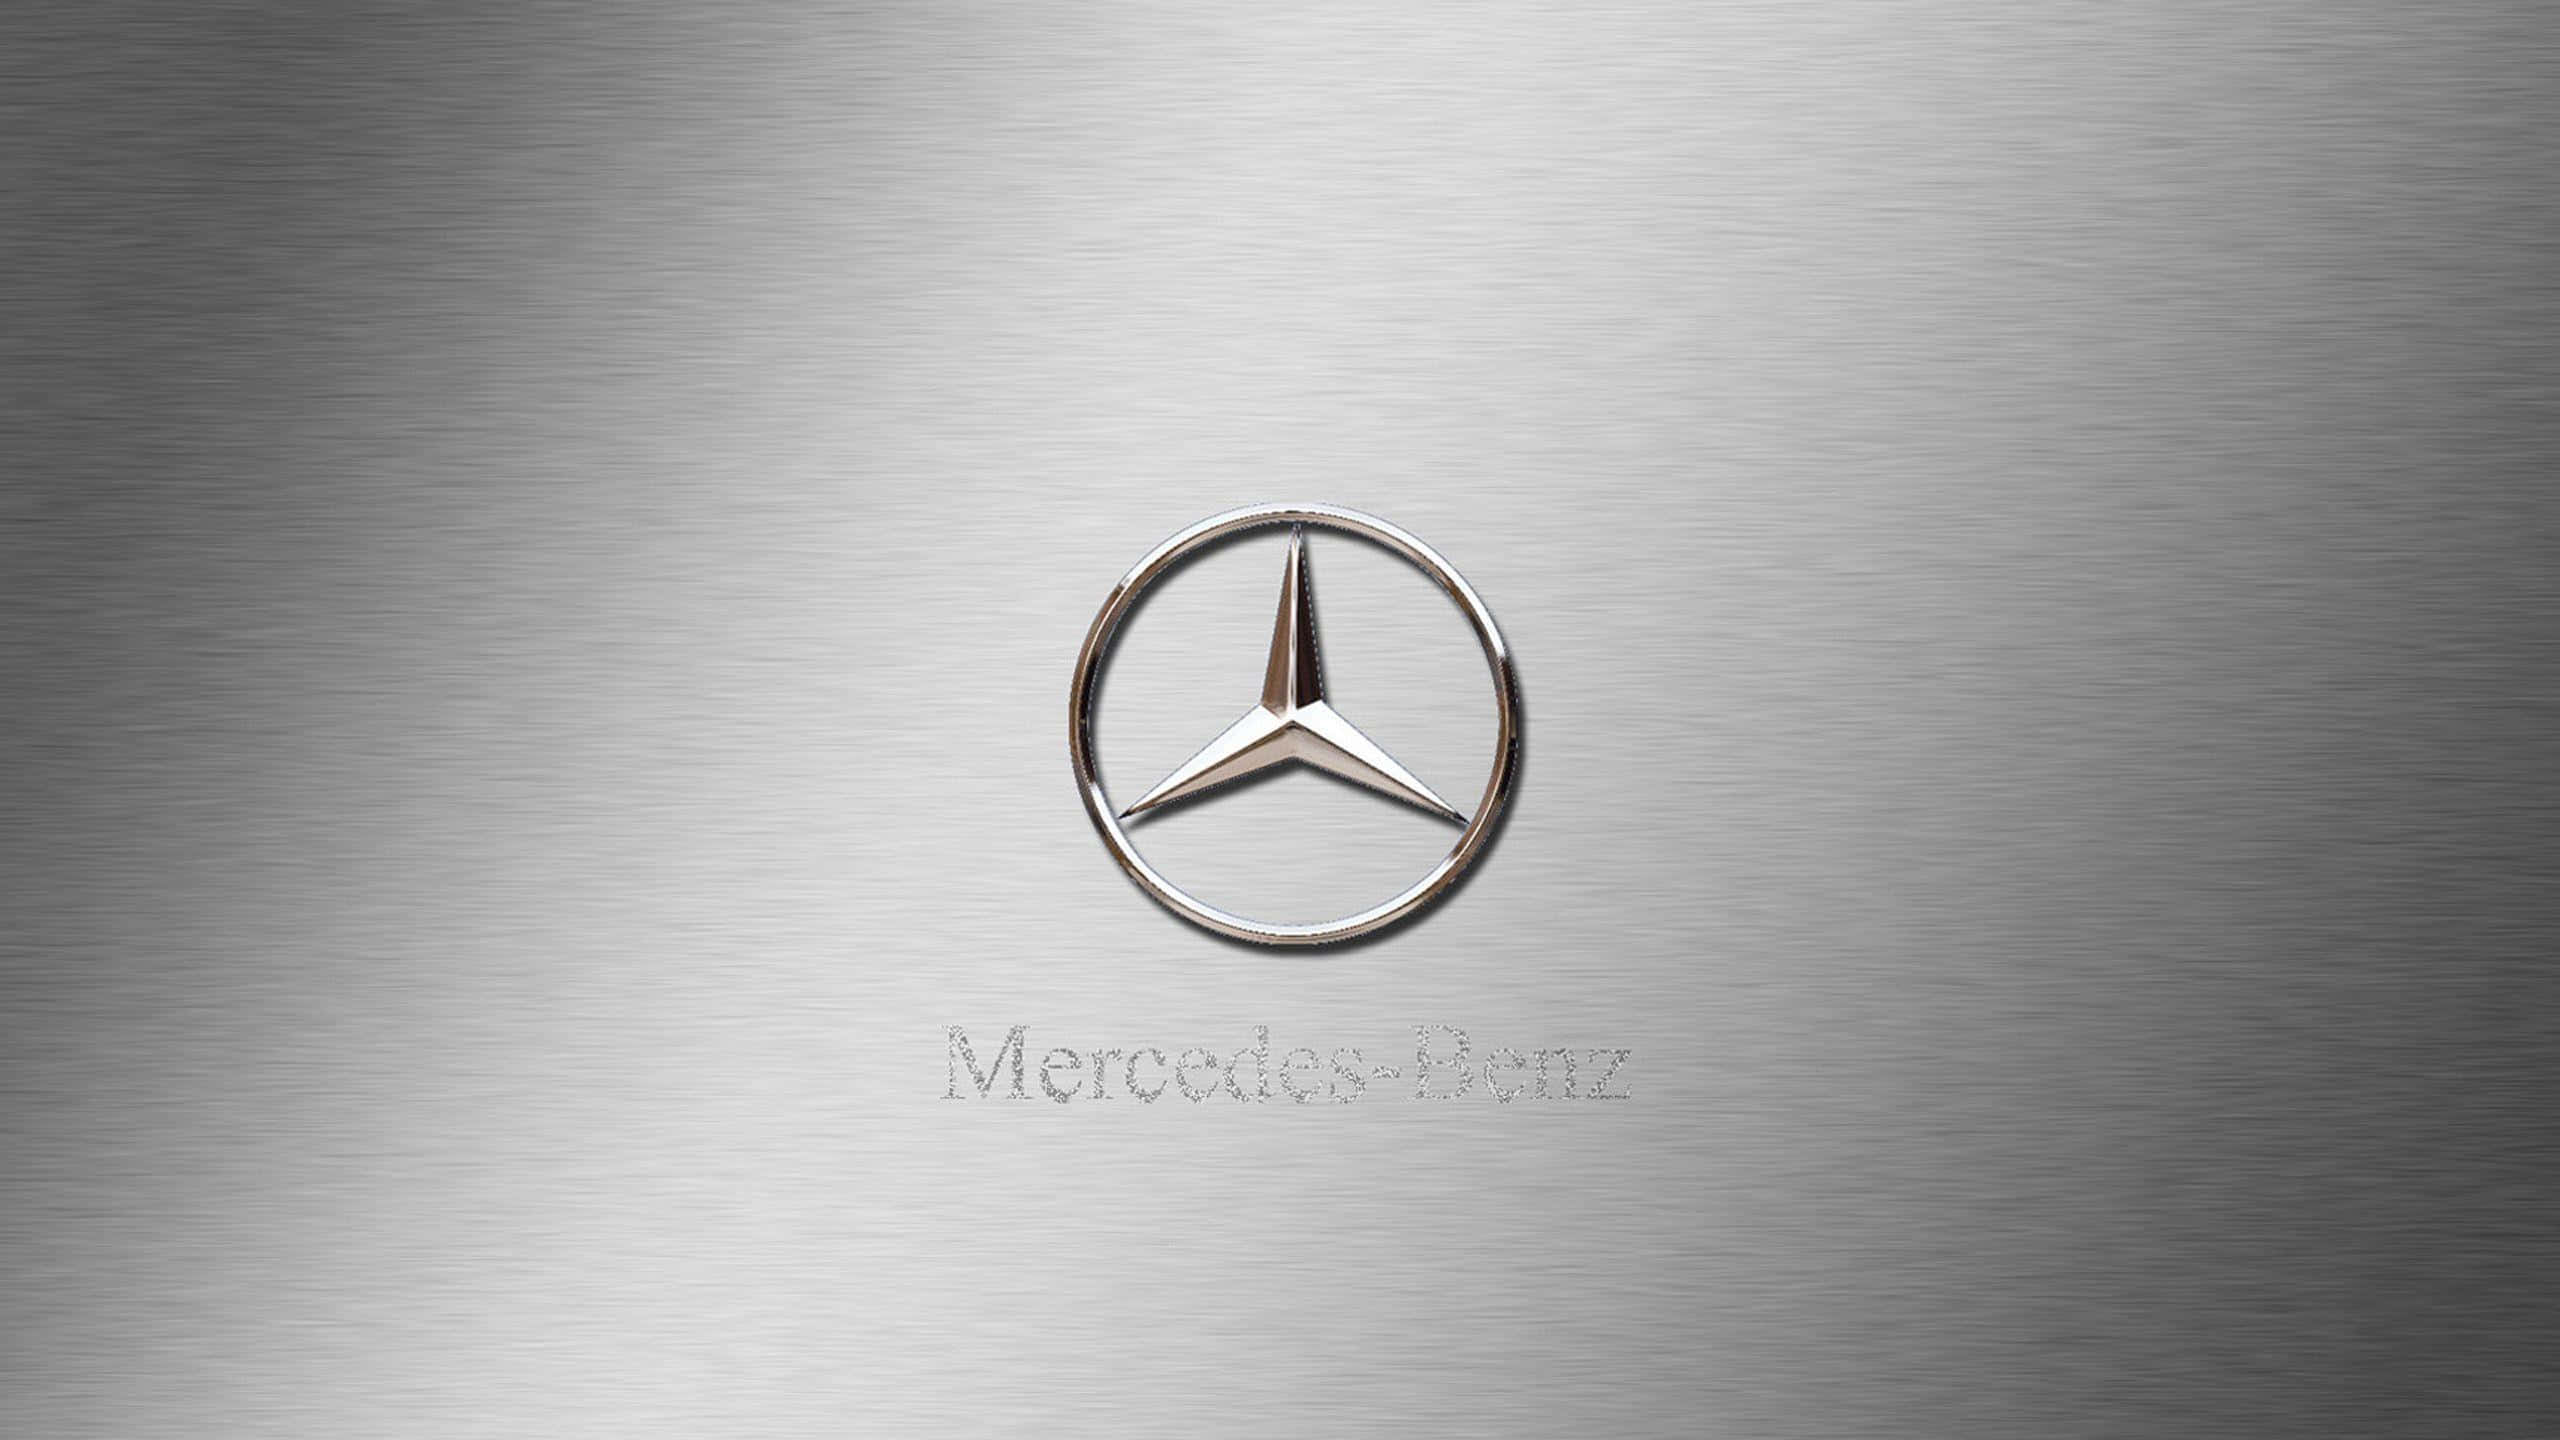 The iconic Mercedes Benz logo on black and silver